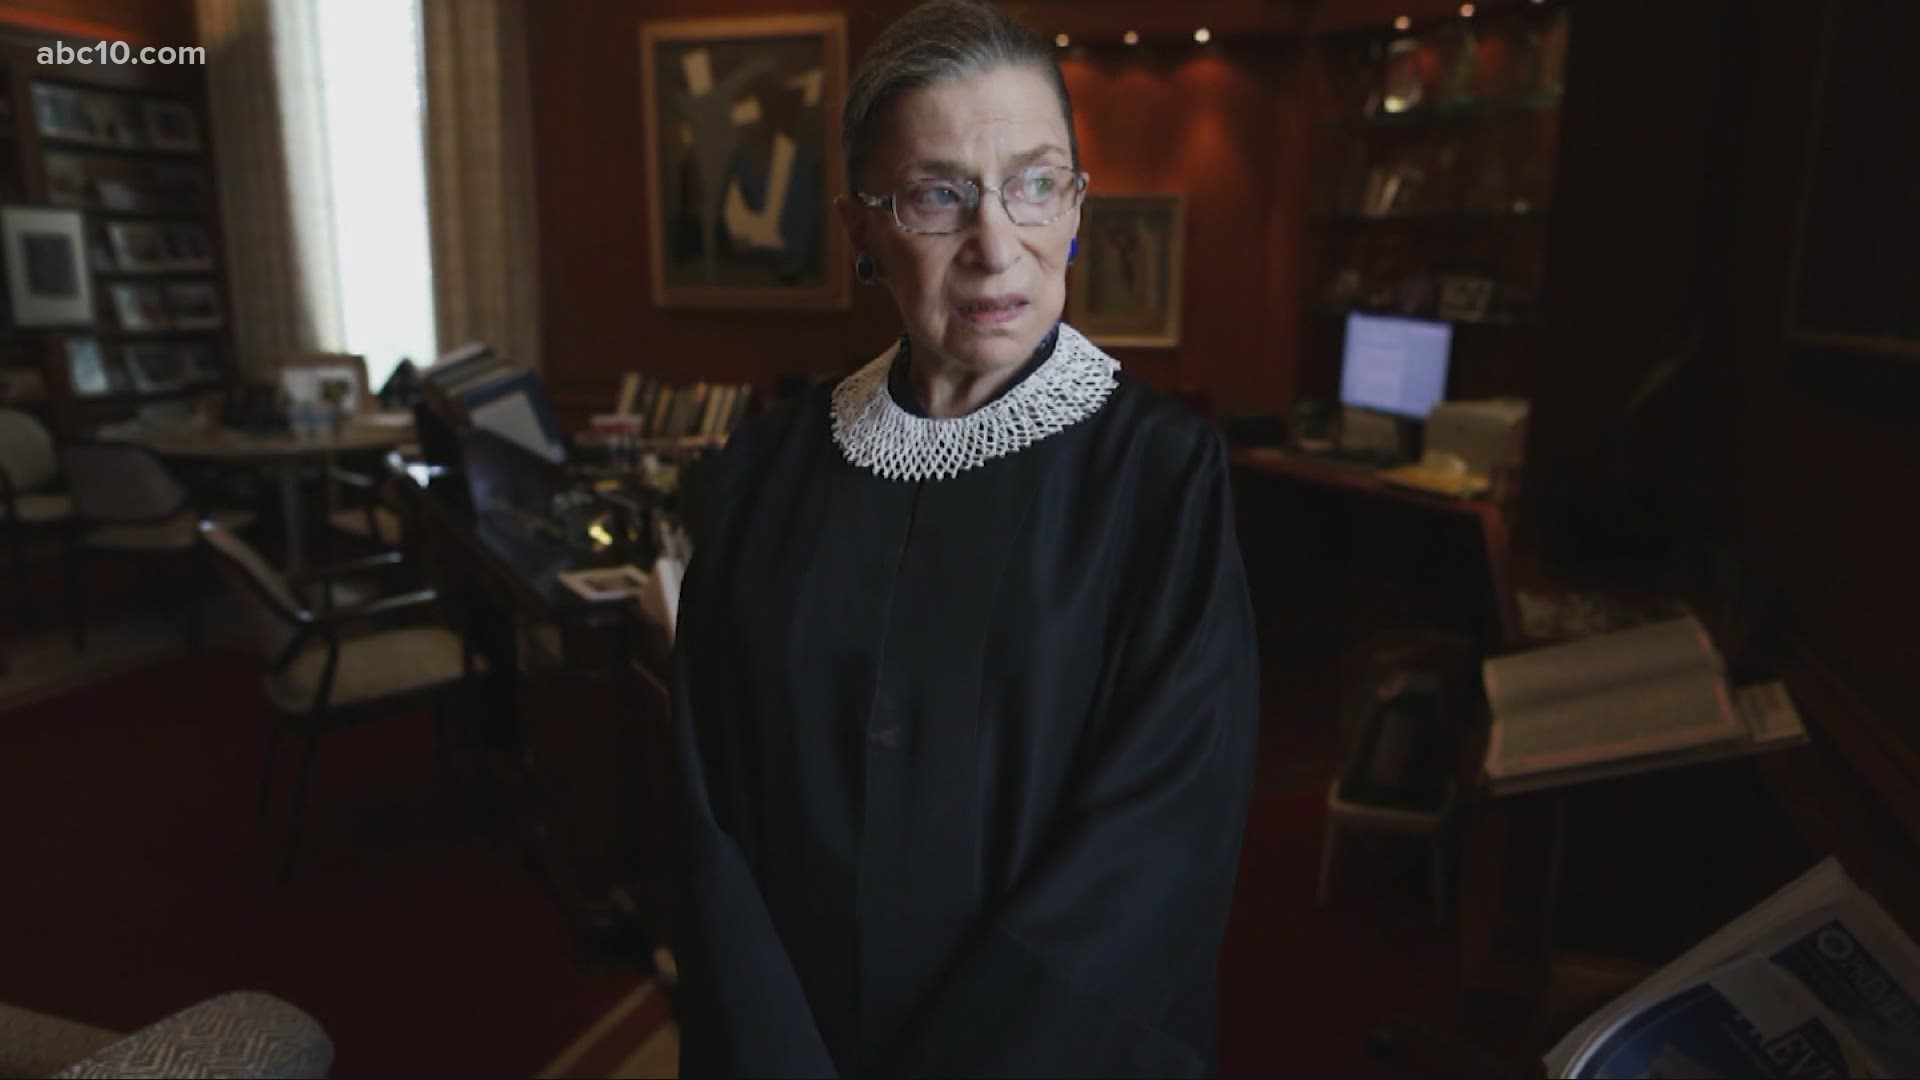 Sacramento residents across the political spectrum react to the news of the death of Supreme Court Associate Justice Ruth Bader Ginsburg